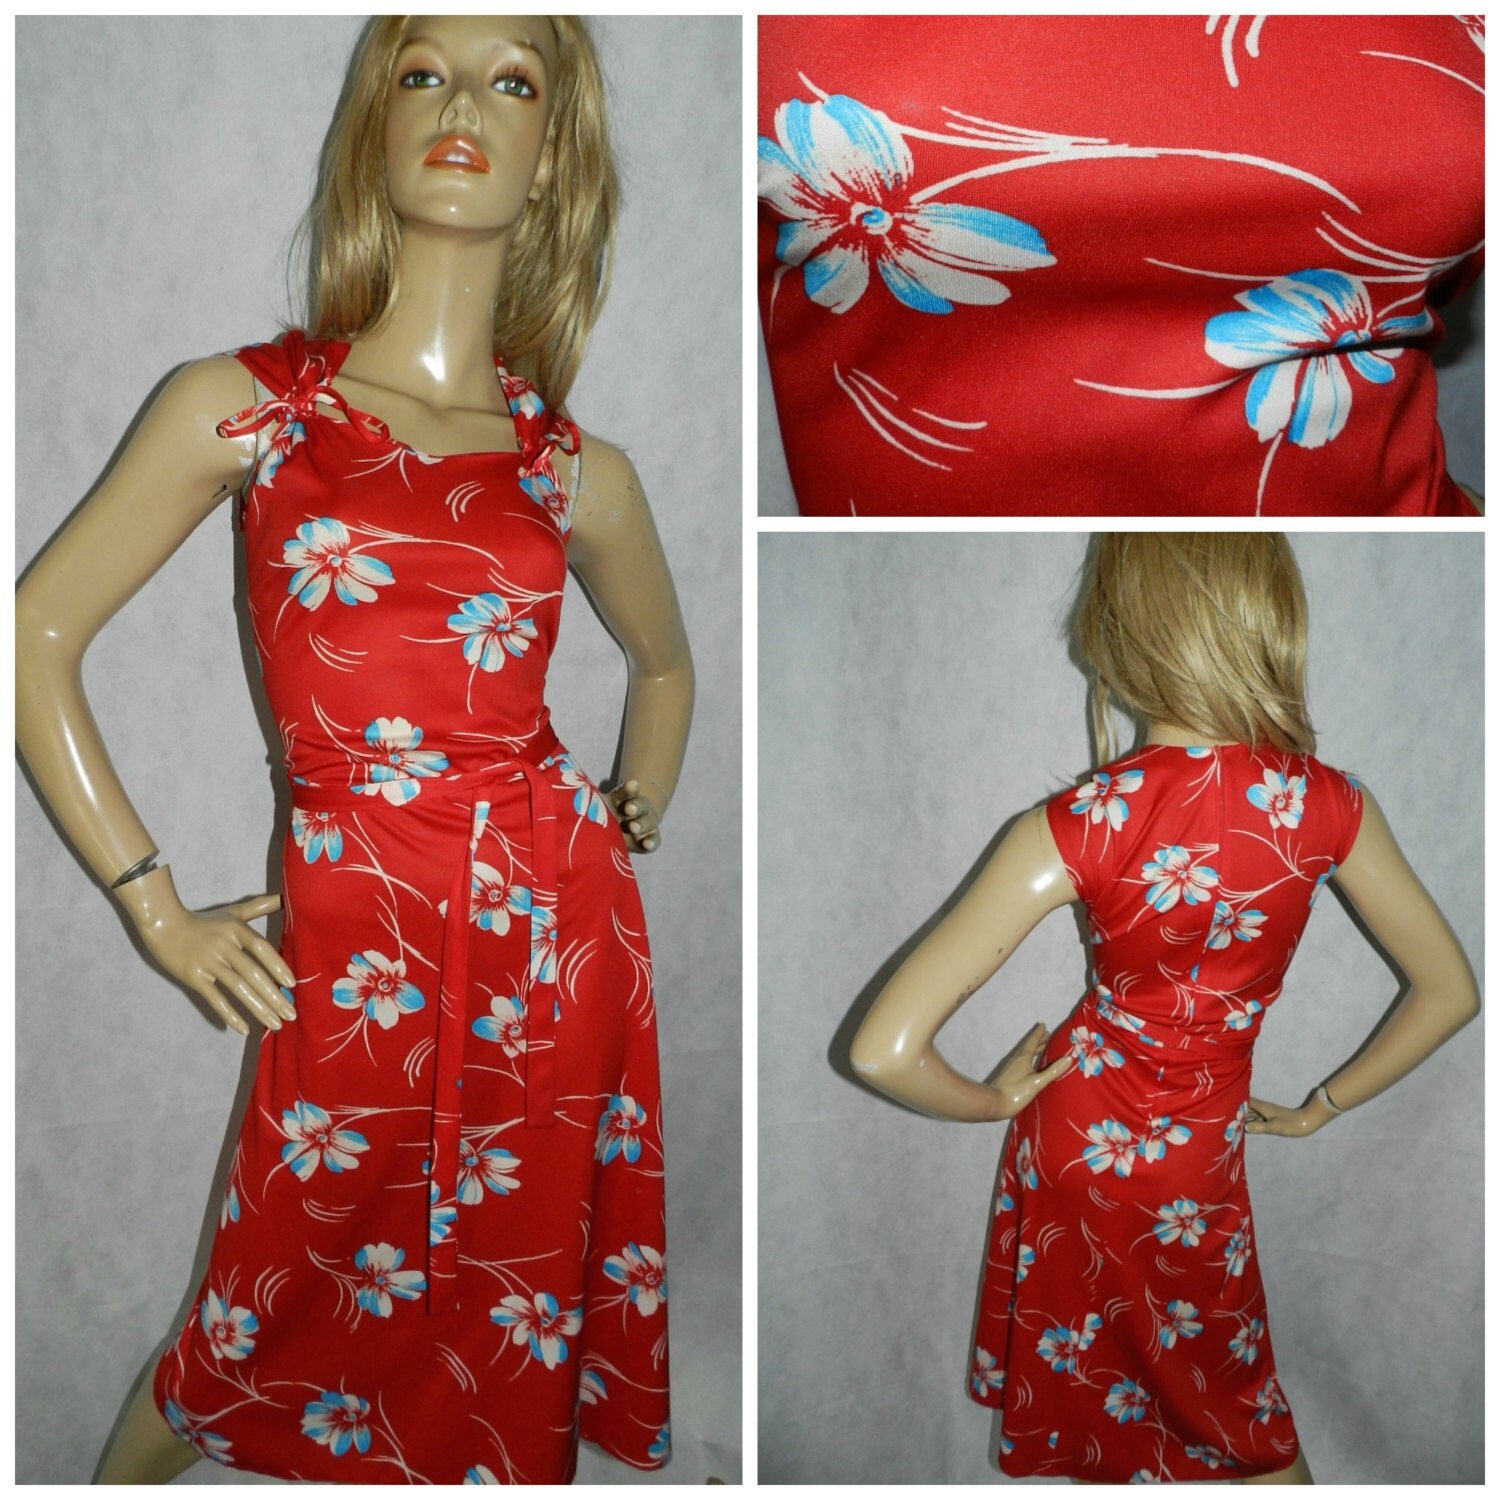 Vintage ORIGINAL 1970s bold red/white/blue ORCHID print swing dress 16 ...